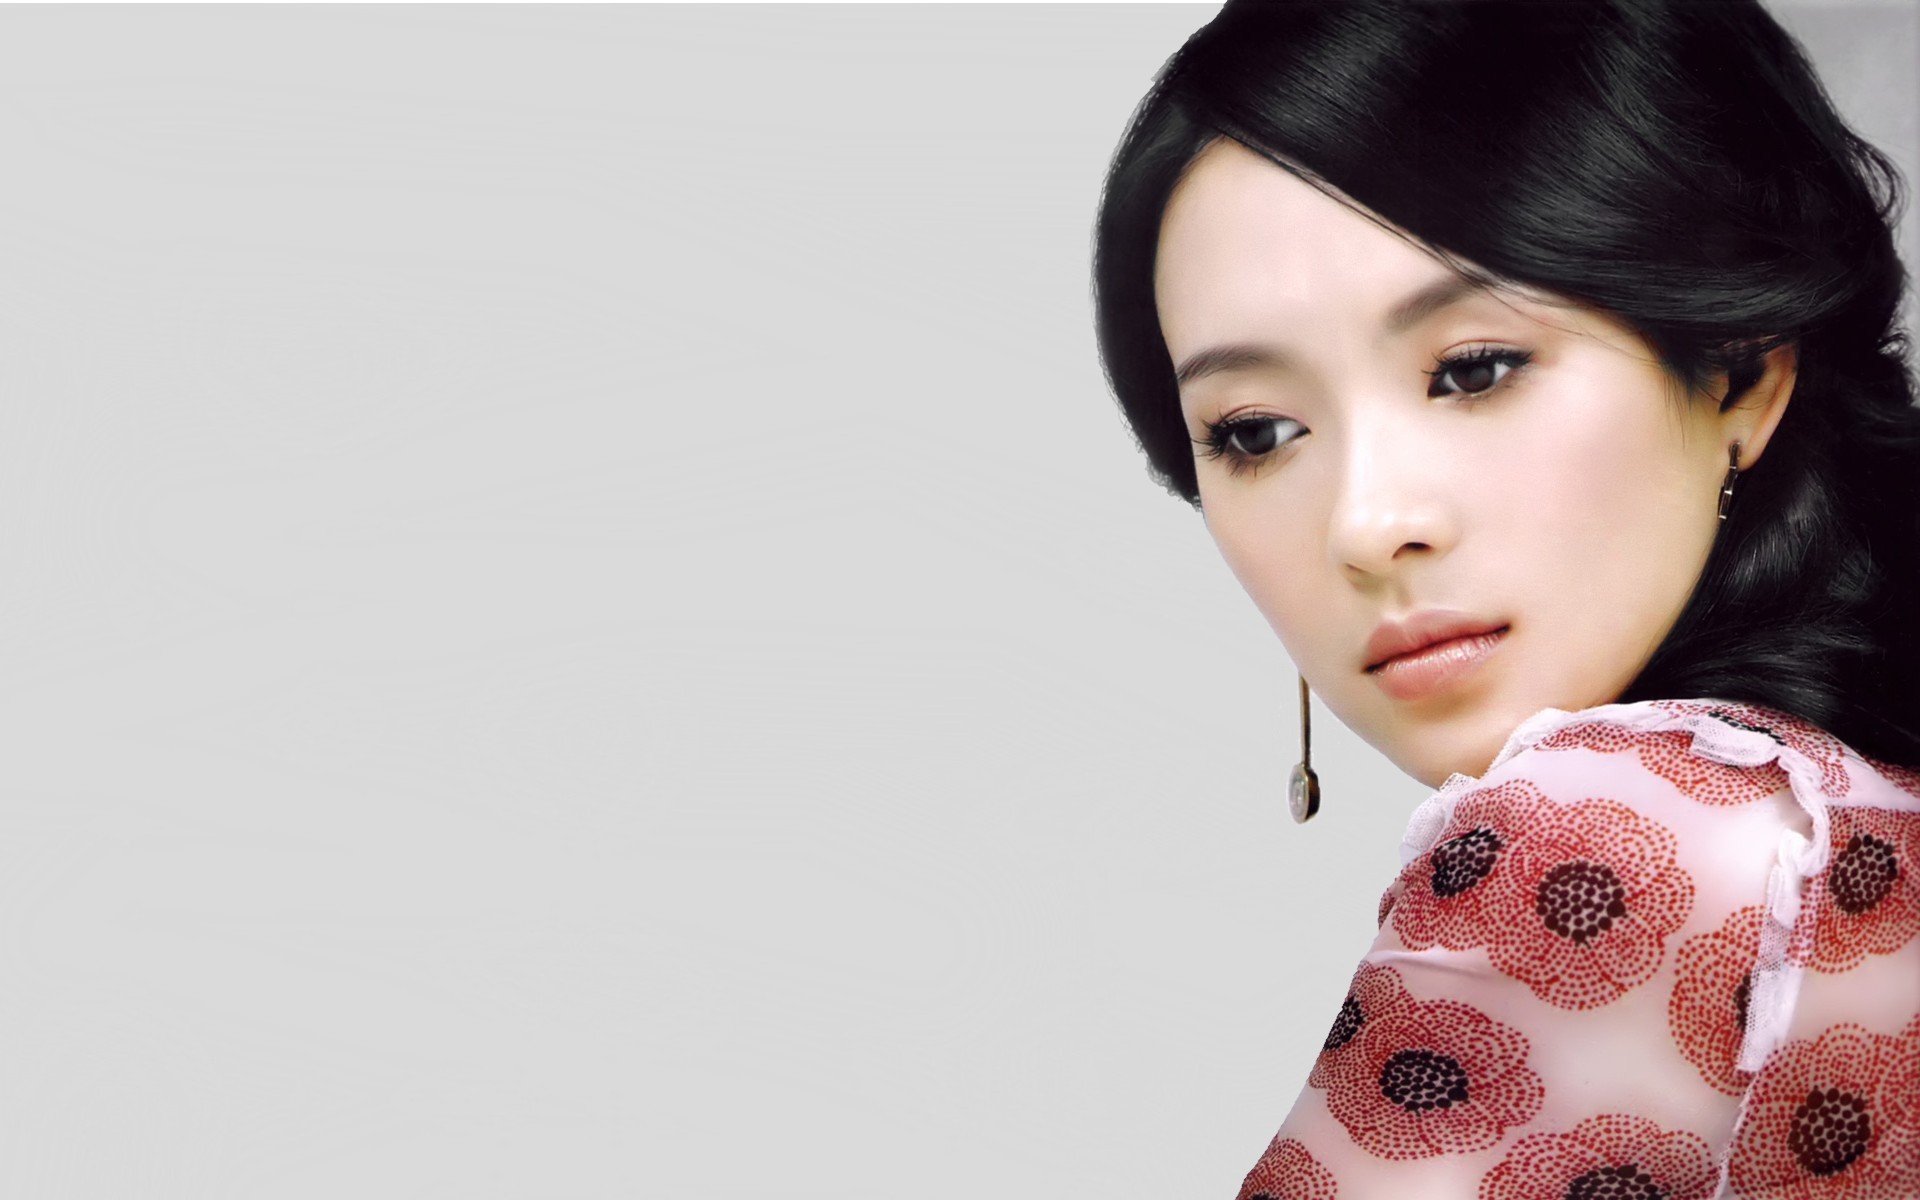 Zhang Ziyi Backgrounds, Compatible - PC, Mobile, Gadgets| 1920x1200 px